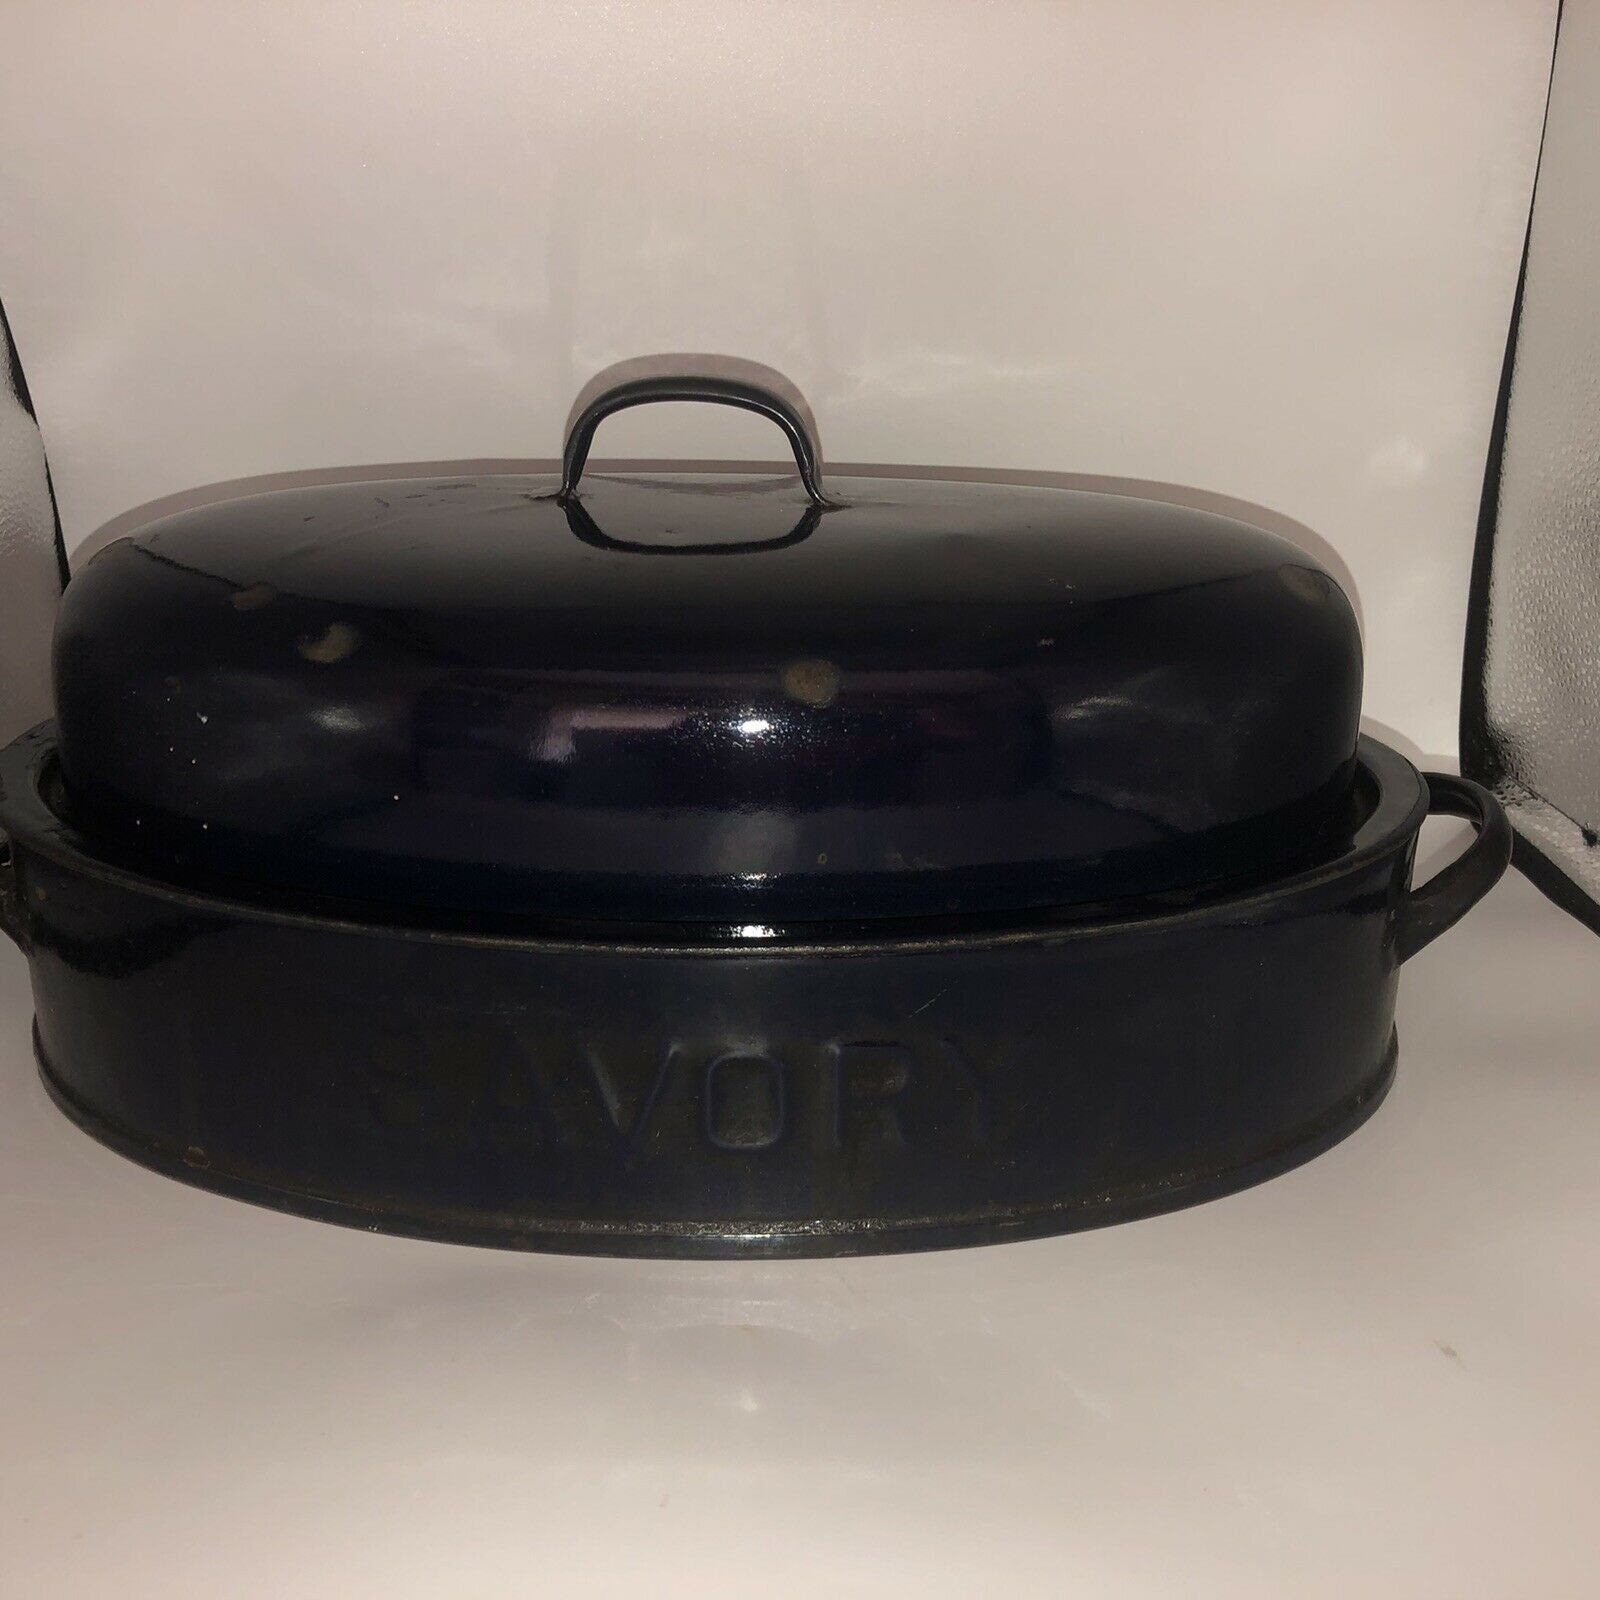 Le Creuset No. 43 Roaster Roasting Pan Red Excellent rare